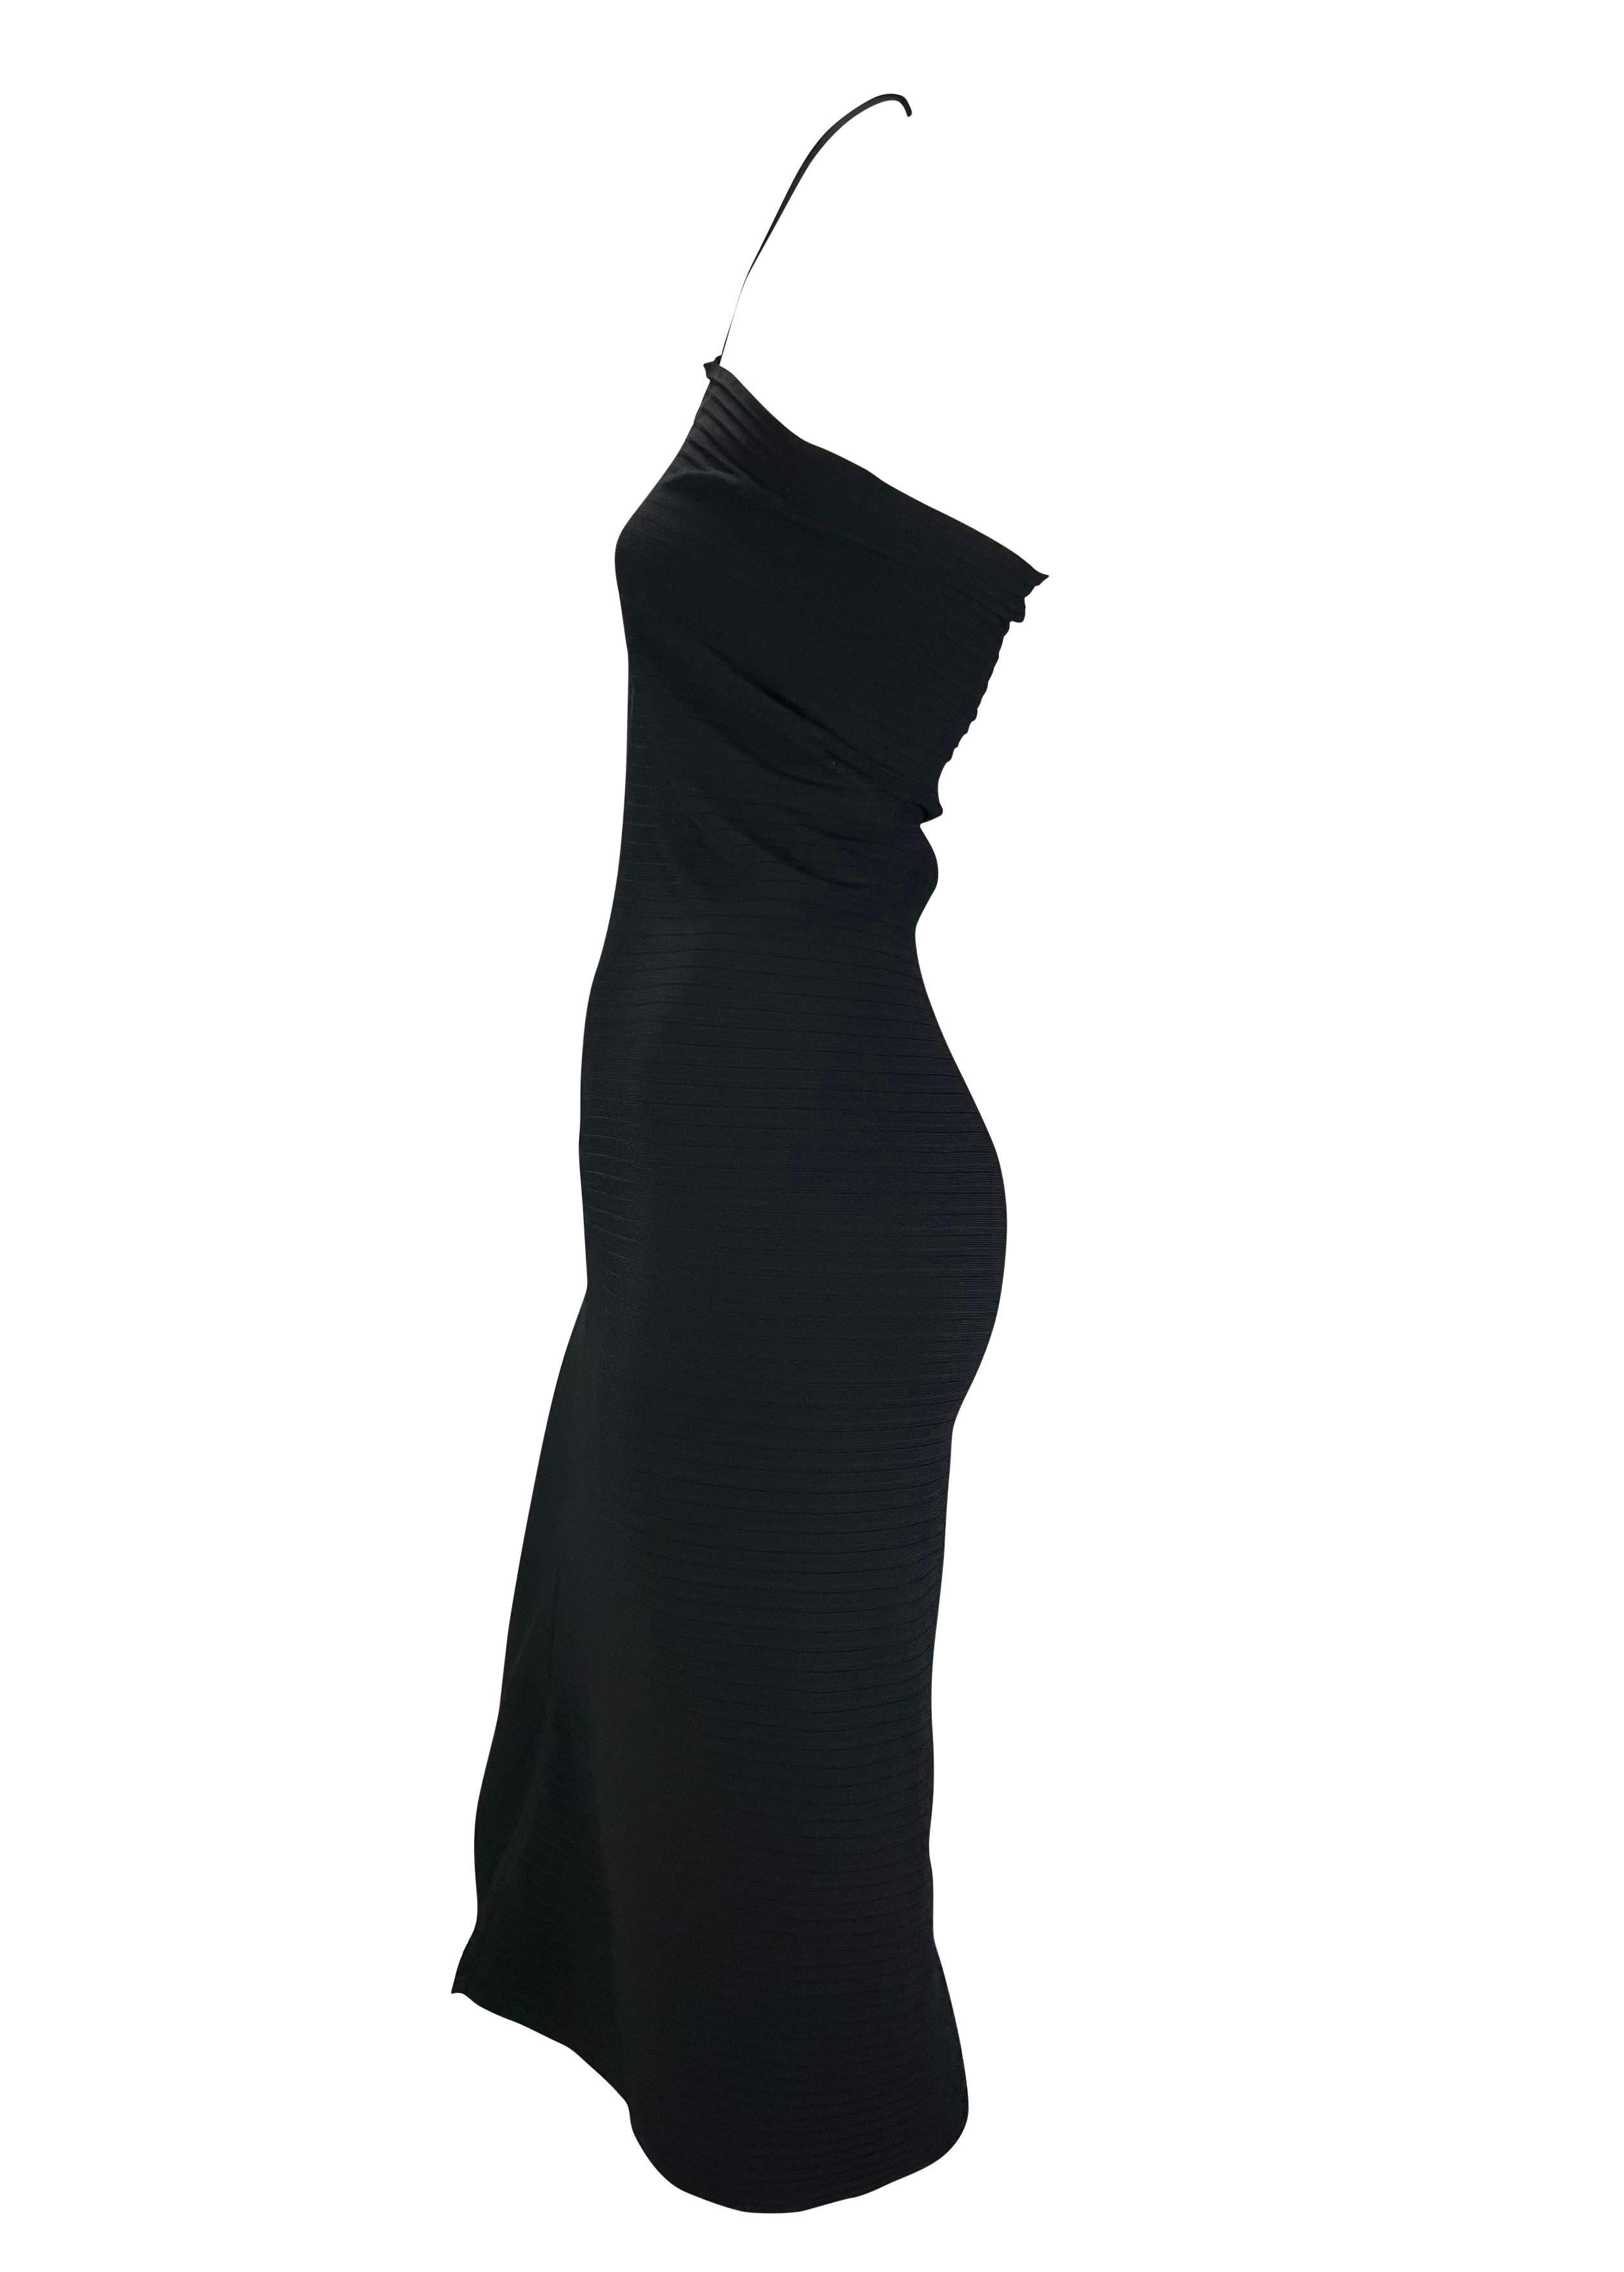 S/S 2000 Gucci by Tom Ford Black Ribbed Stretch Tube Dress Logo Buckle In Good Condition For Sale In West Hollywood, CA